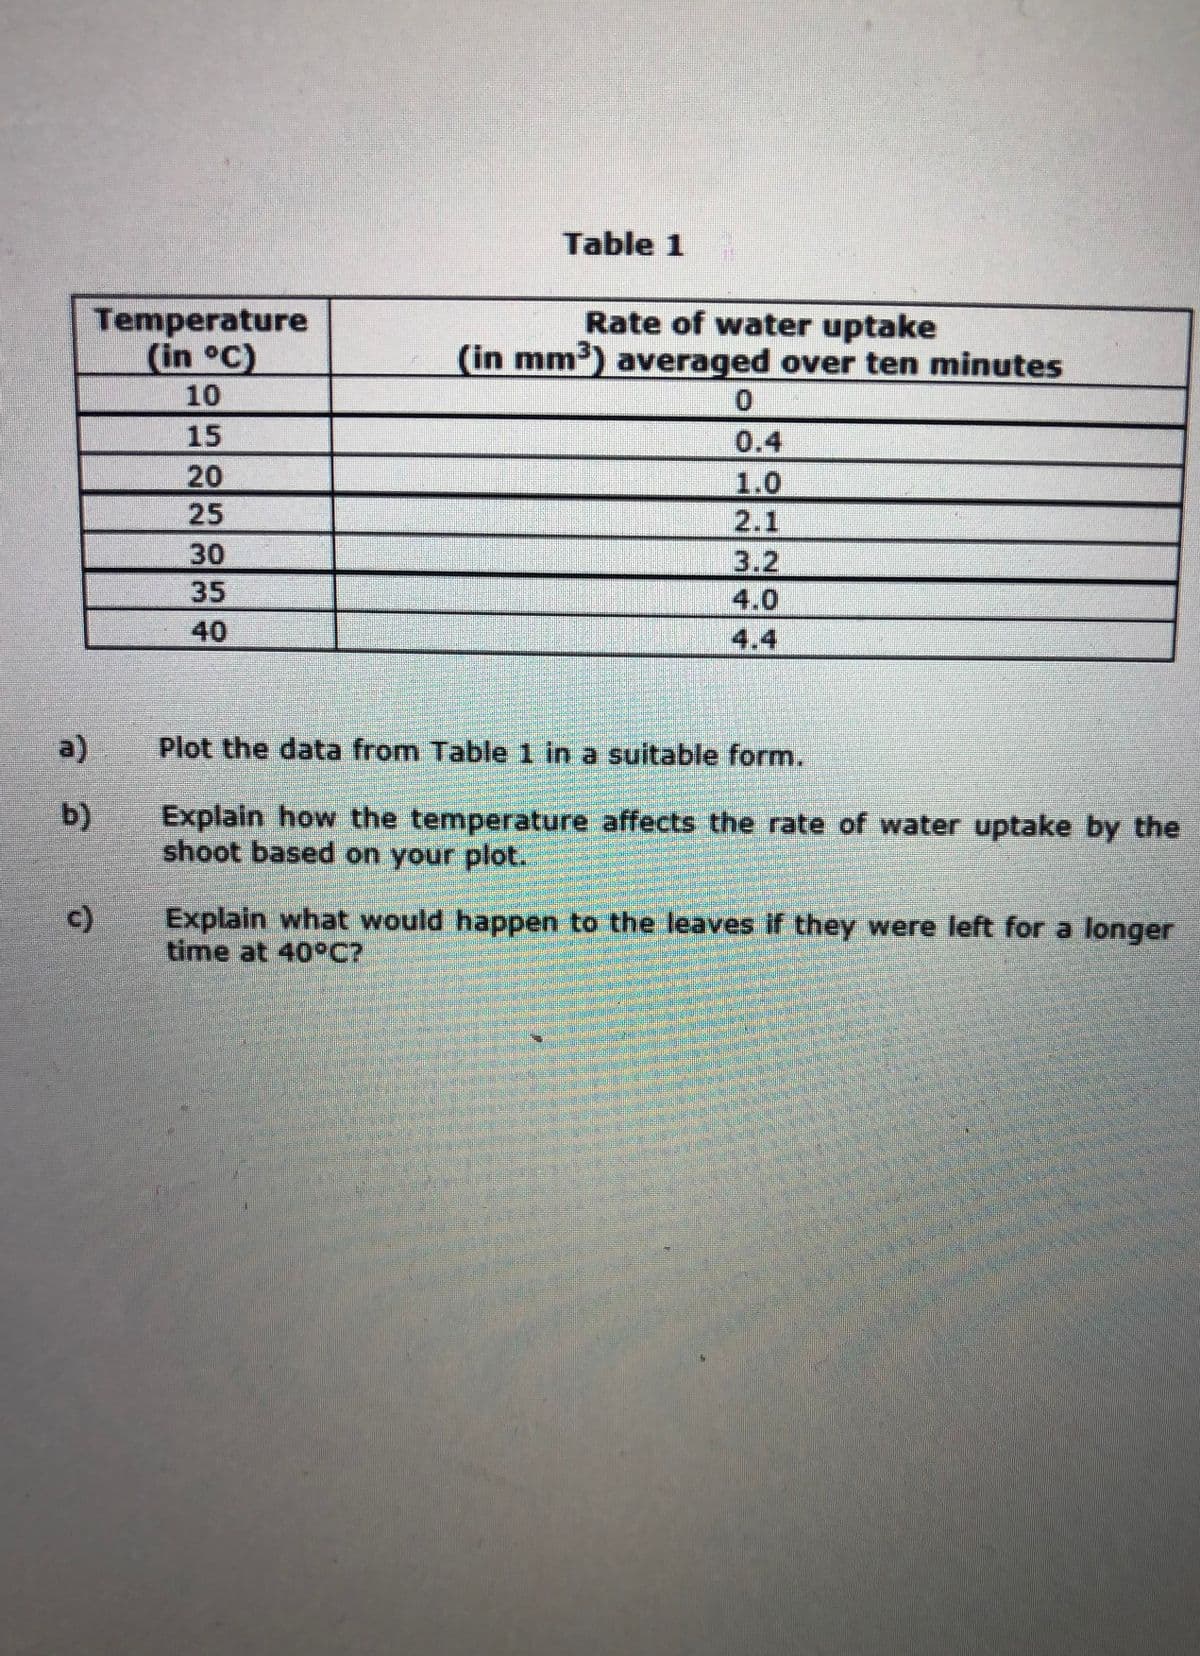 Table 1
Temperature
(in °C)
Rate of water uptake
(in mm³) averaged over ten minutes
10
0.
15
0.4
20
1.0
25
2.1
30
3.2
35
4.0
40
4.4
a)
Plot the data from Table 1 in a suitable form.
b)
Explain how the temperature affects the rate of water uptake by the
shoot based on your plot.
Explain what would happen to the leaves if they were left for a longer
time at 40°C?
c)
